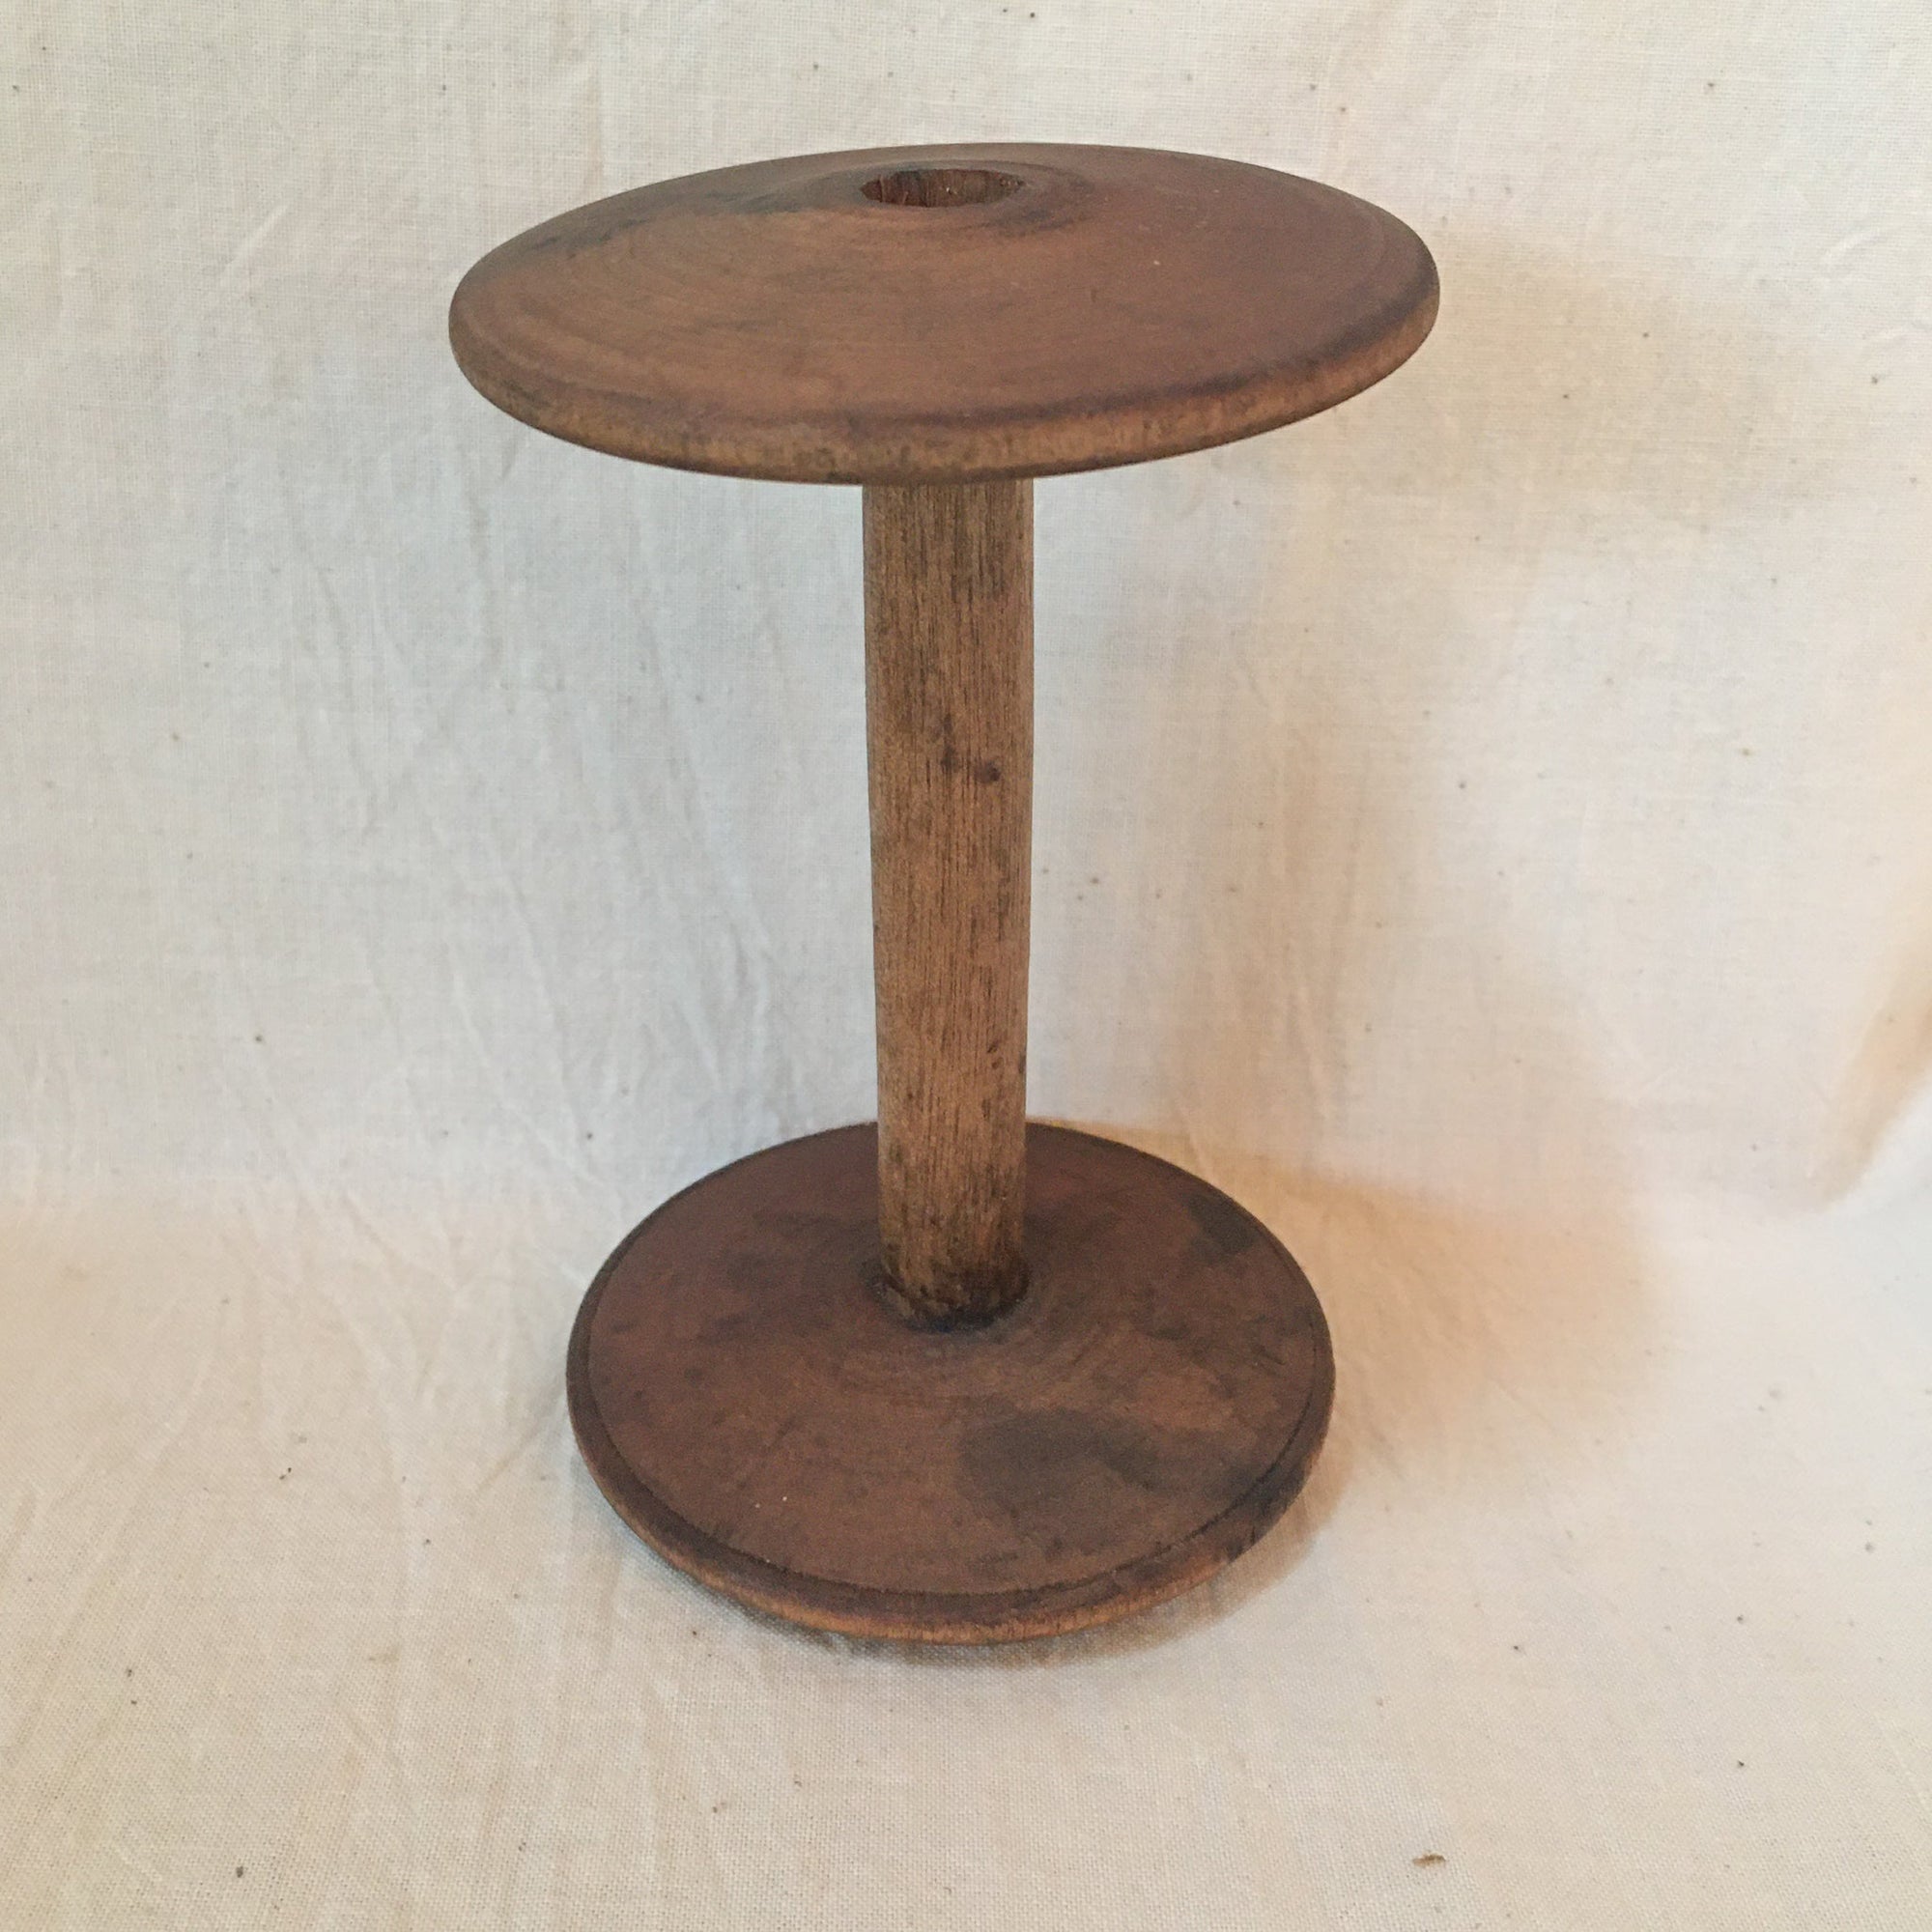 Small Wooden Spool, 4.5 Inches Long